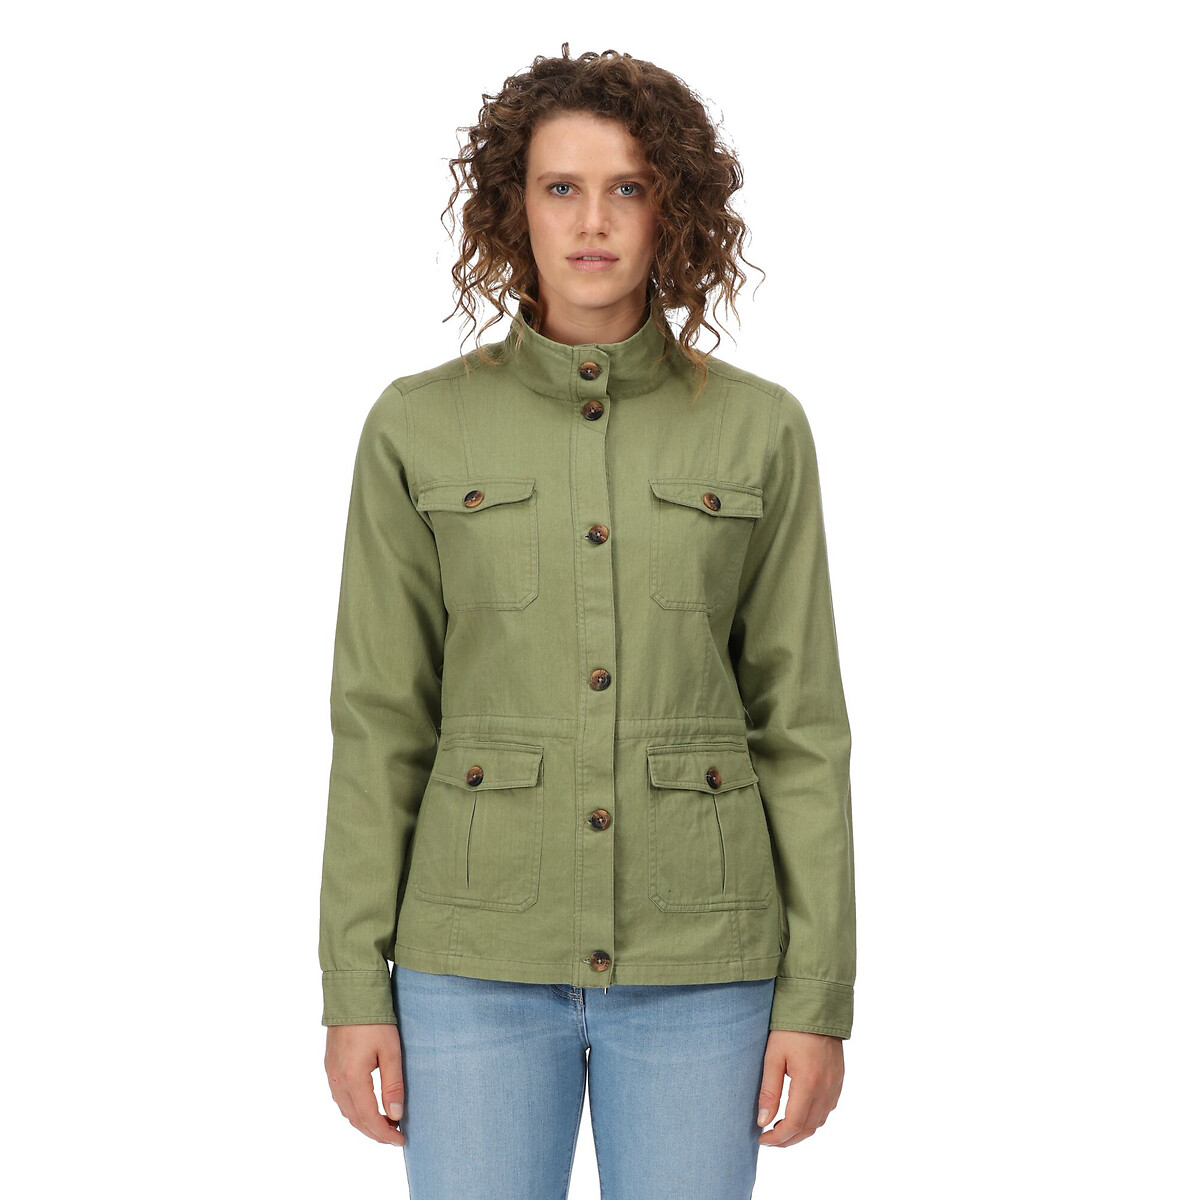 Green Utility Jacket | Army jacket outfits, Jacket outfit women, Casual  jacket outfit